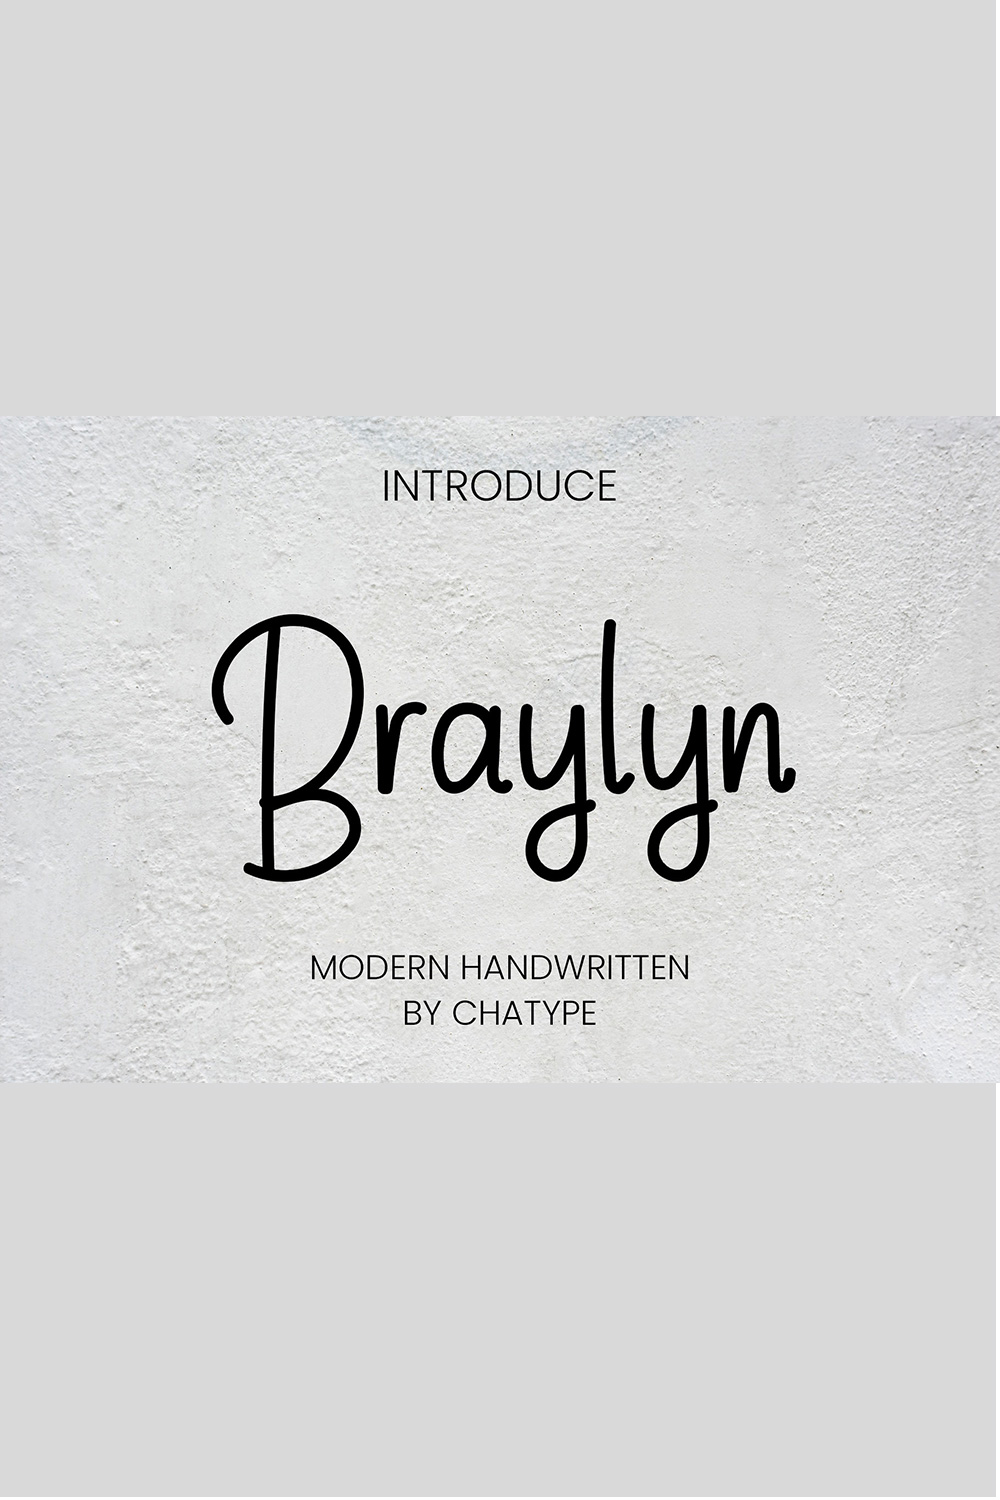 An image with text showing the unique Braylyn font